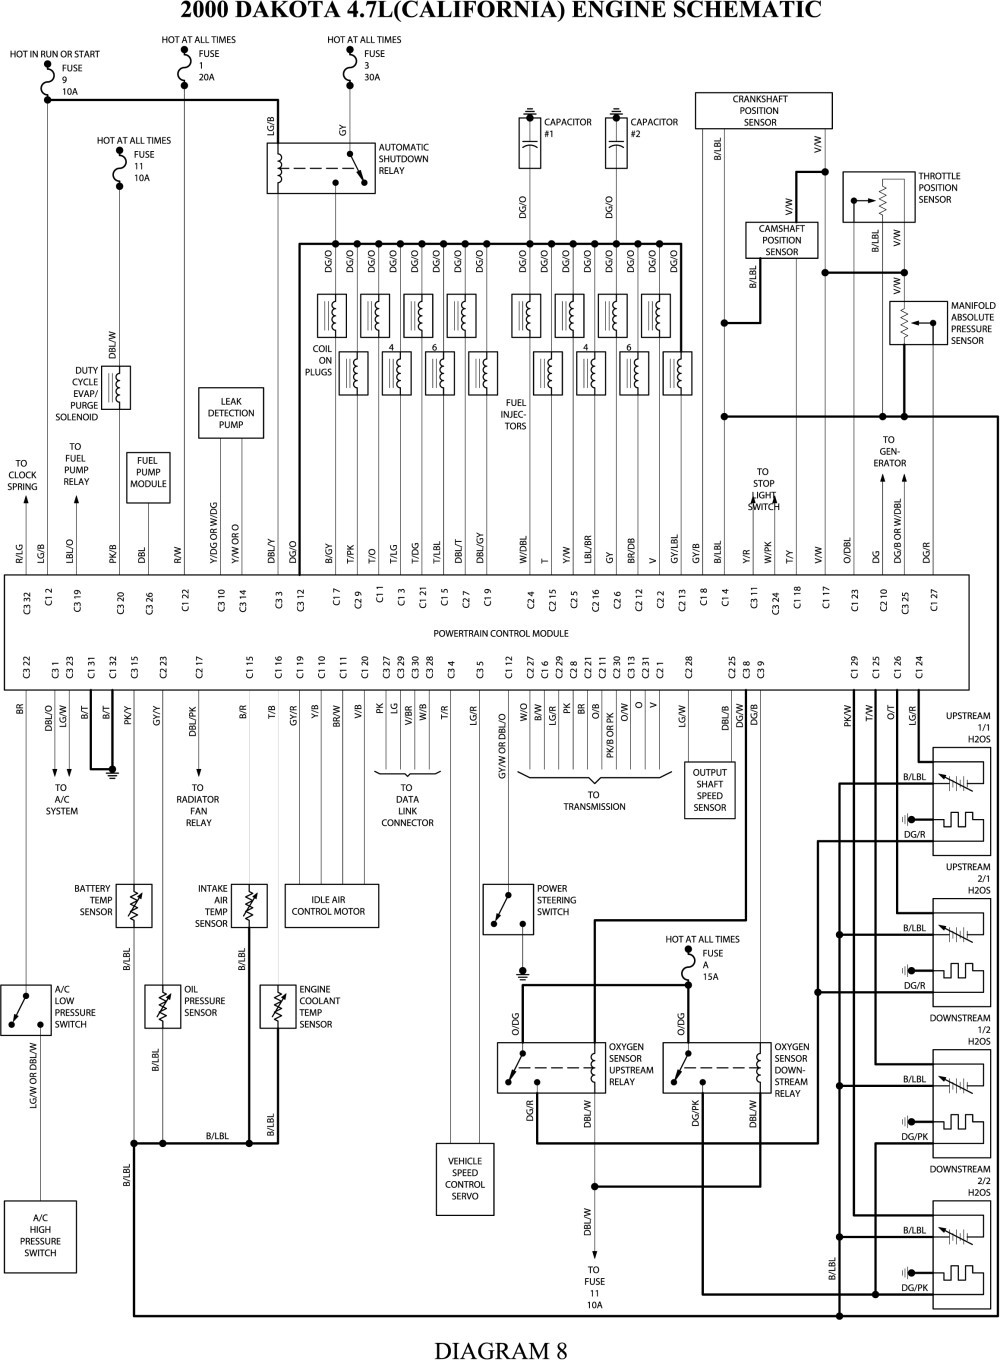 kenworth wiring diagrams - Wiring Diagram and Schematic